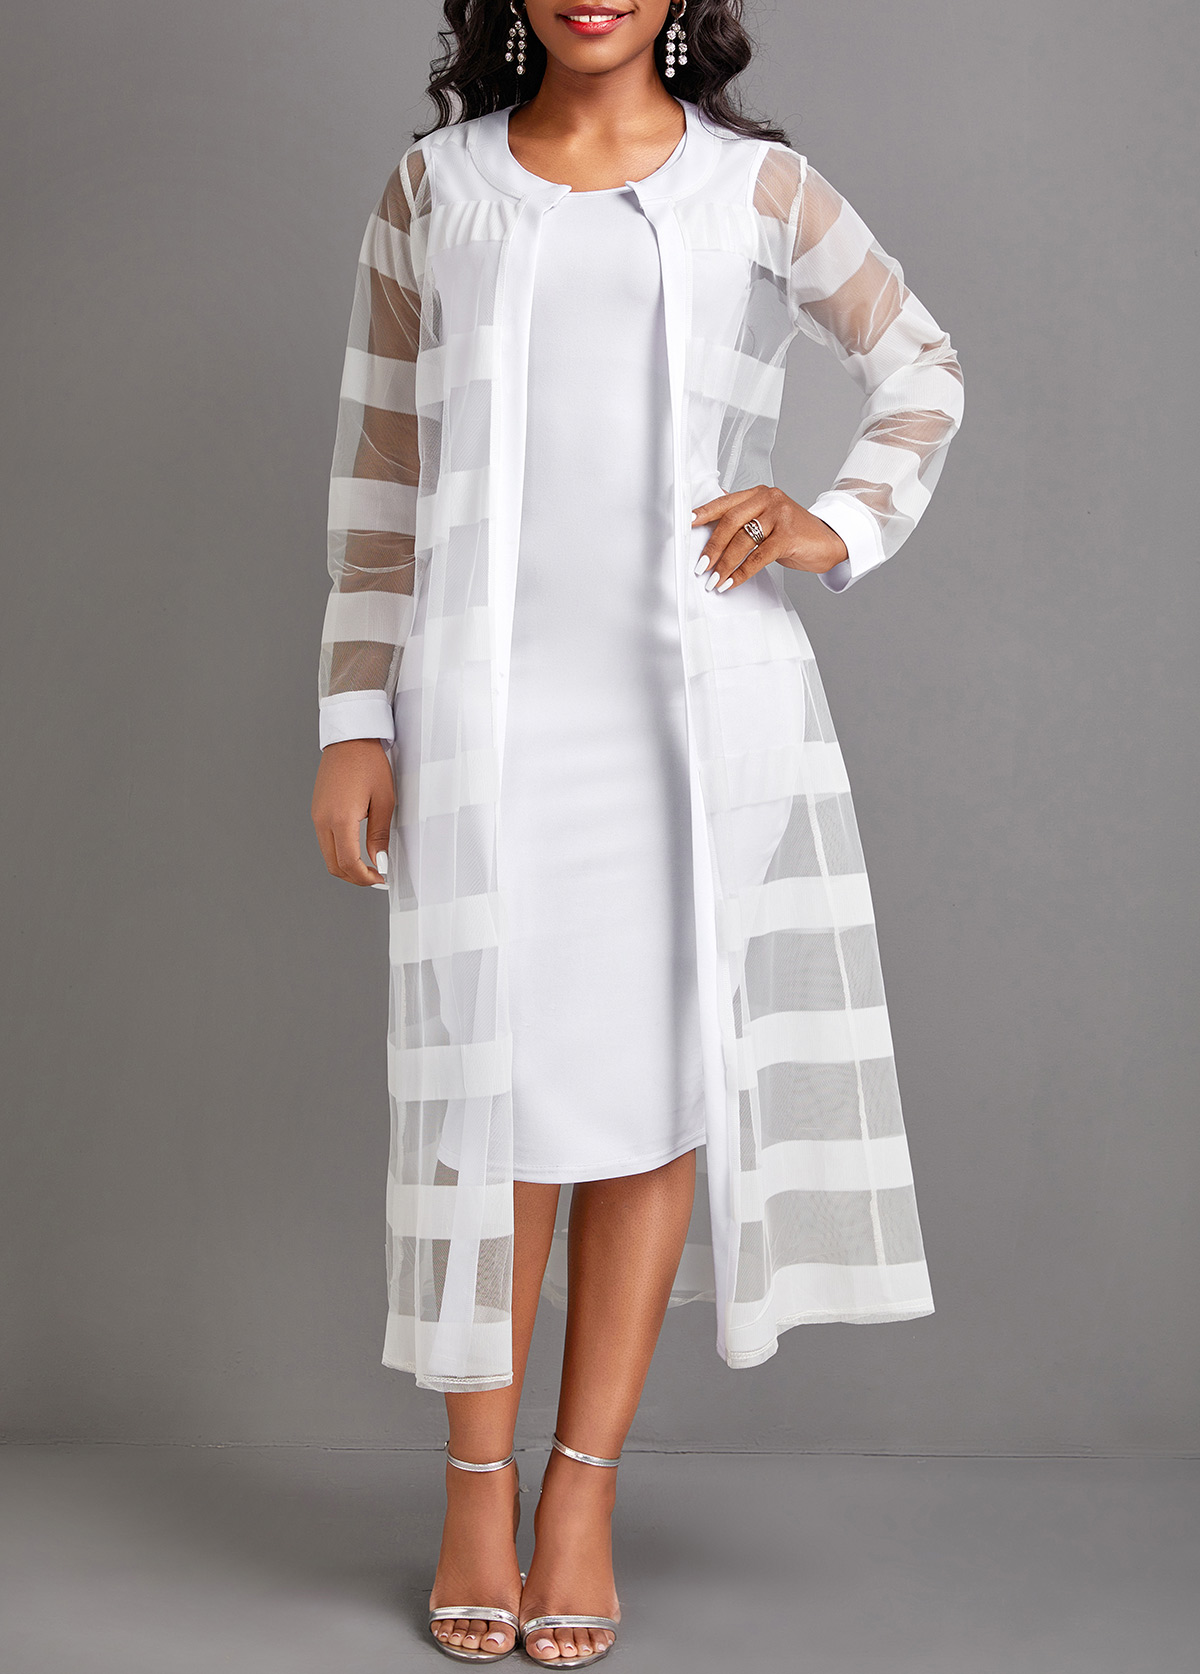 Two Piece White Long Sleeve Dress and Cardigan